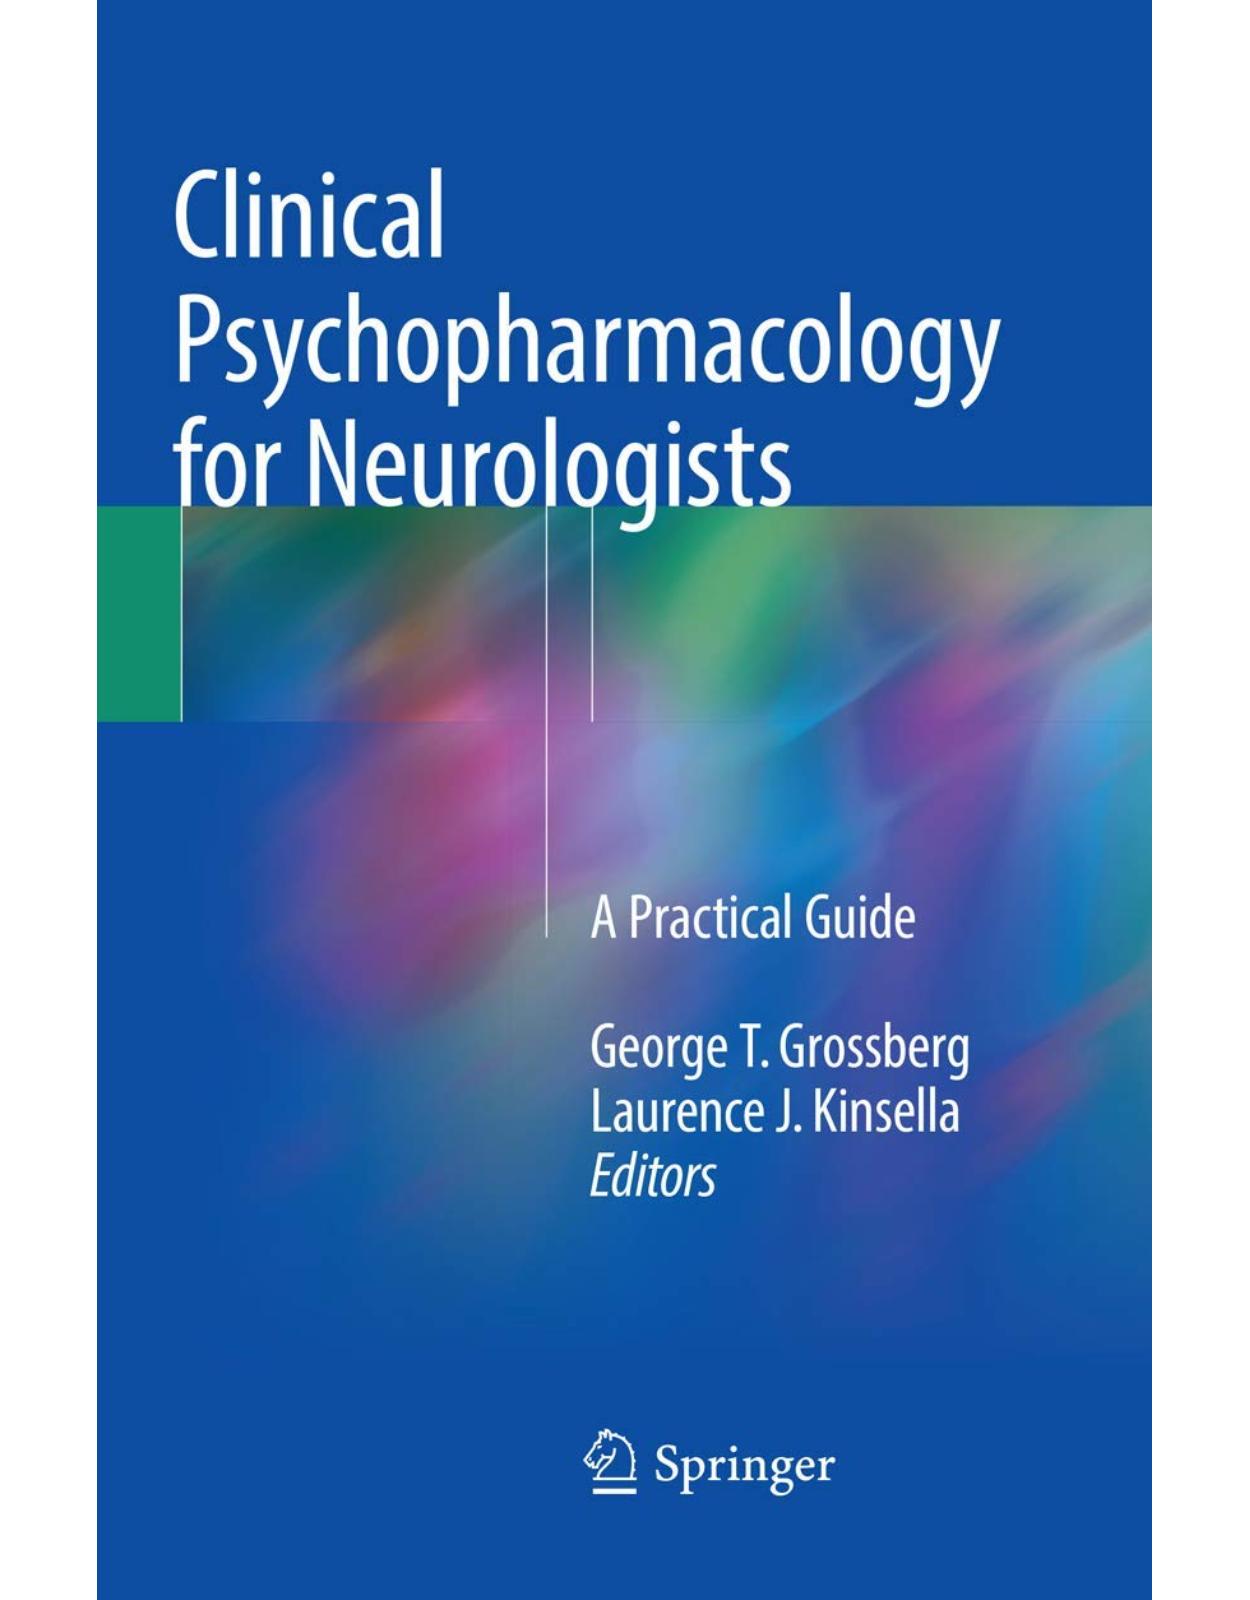 Clinical Psychopharmacology for Neurologists: A Practical Guide